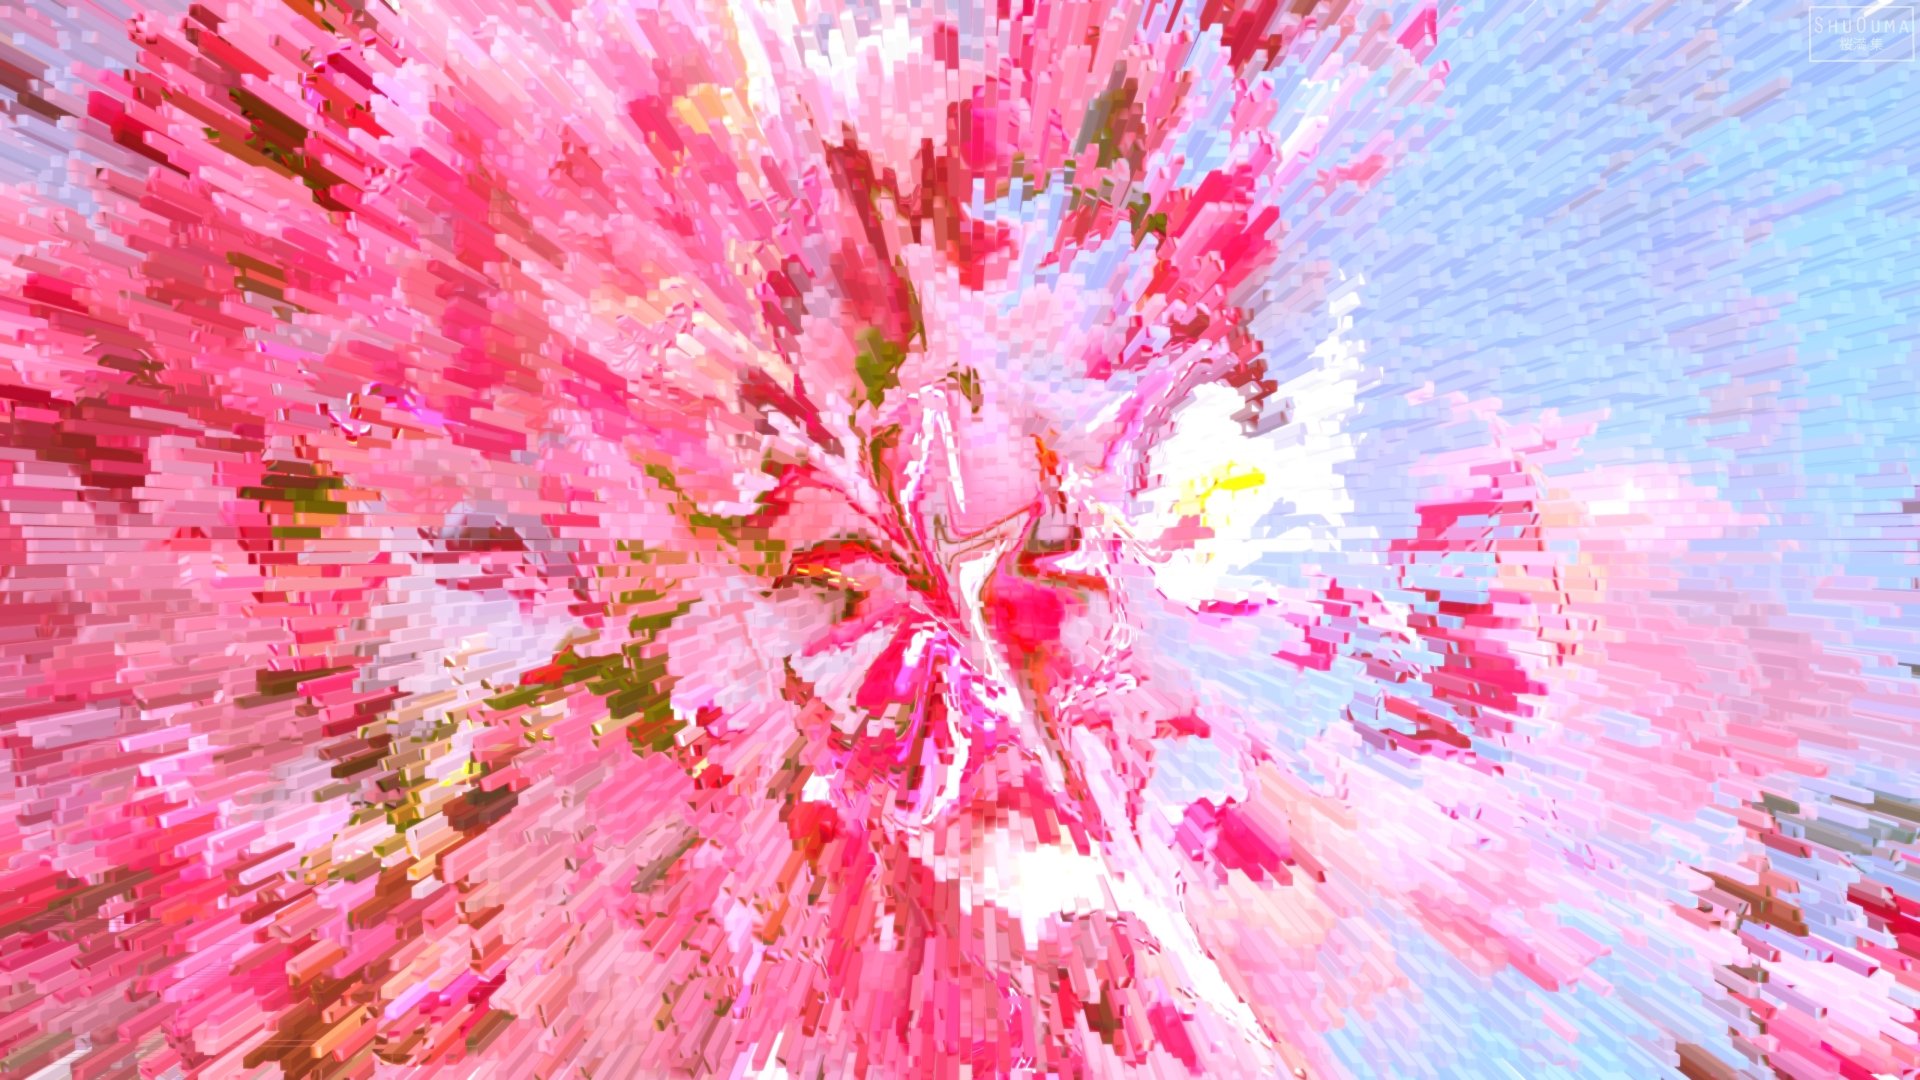 Abstract Pink 4k Ultra HD Wallpaper | Background Image | 5120x2880